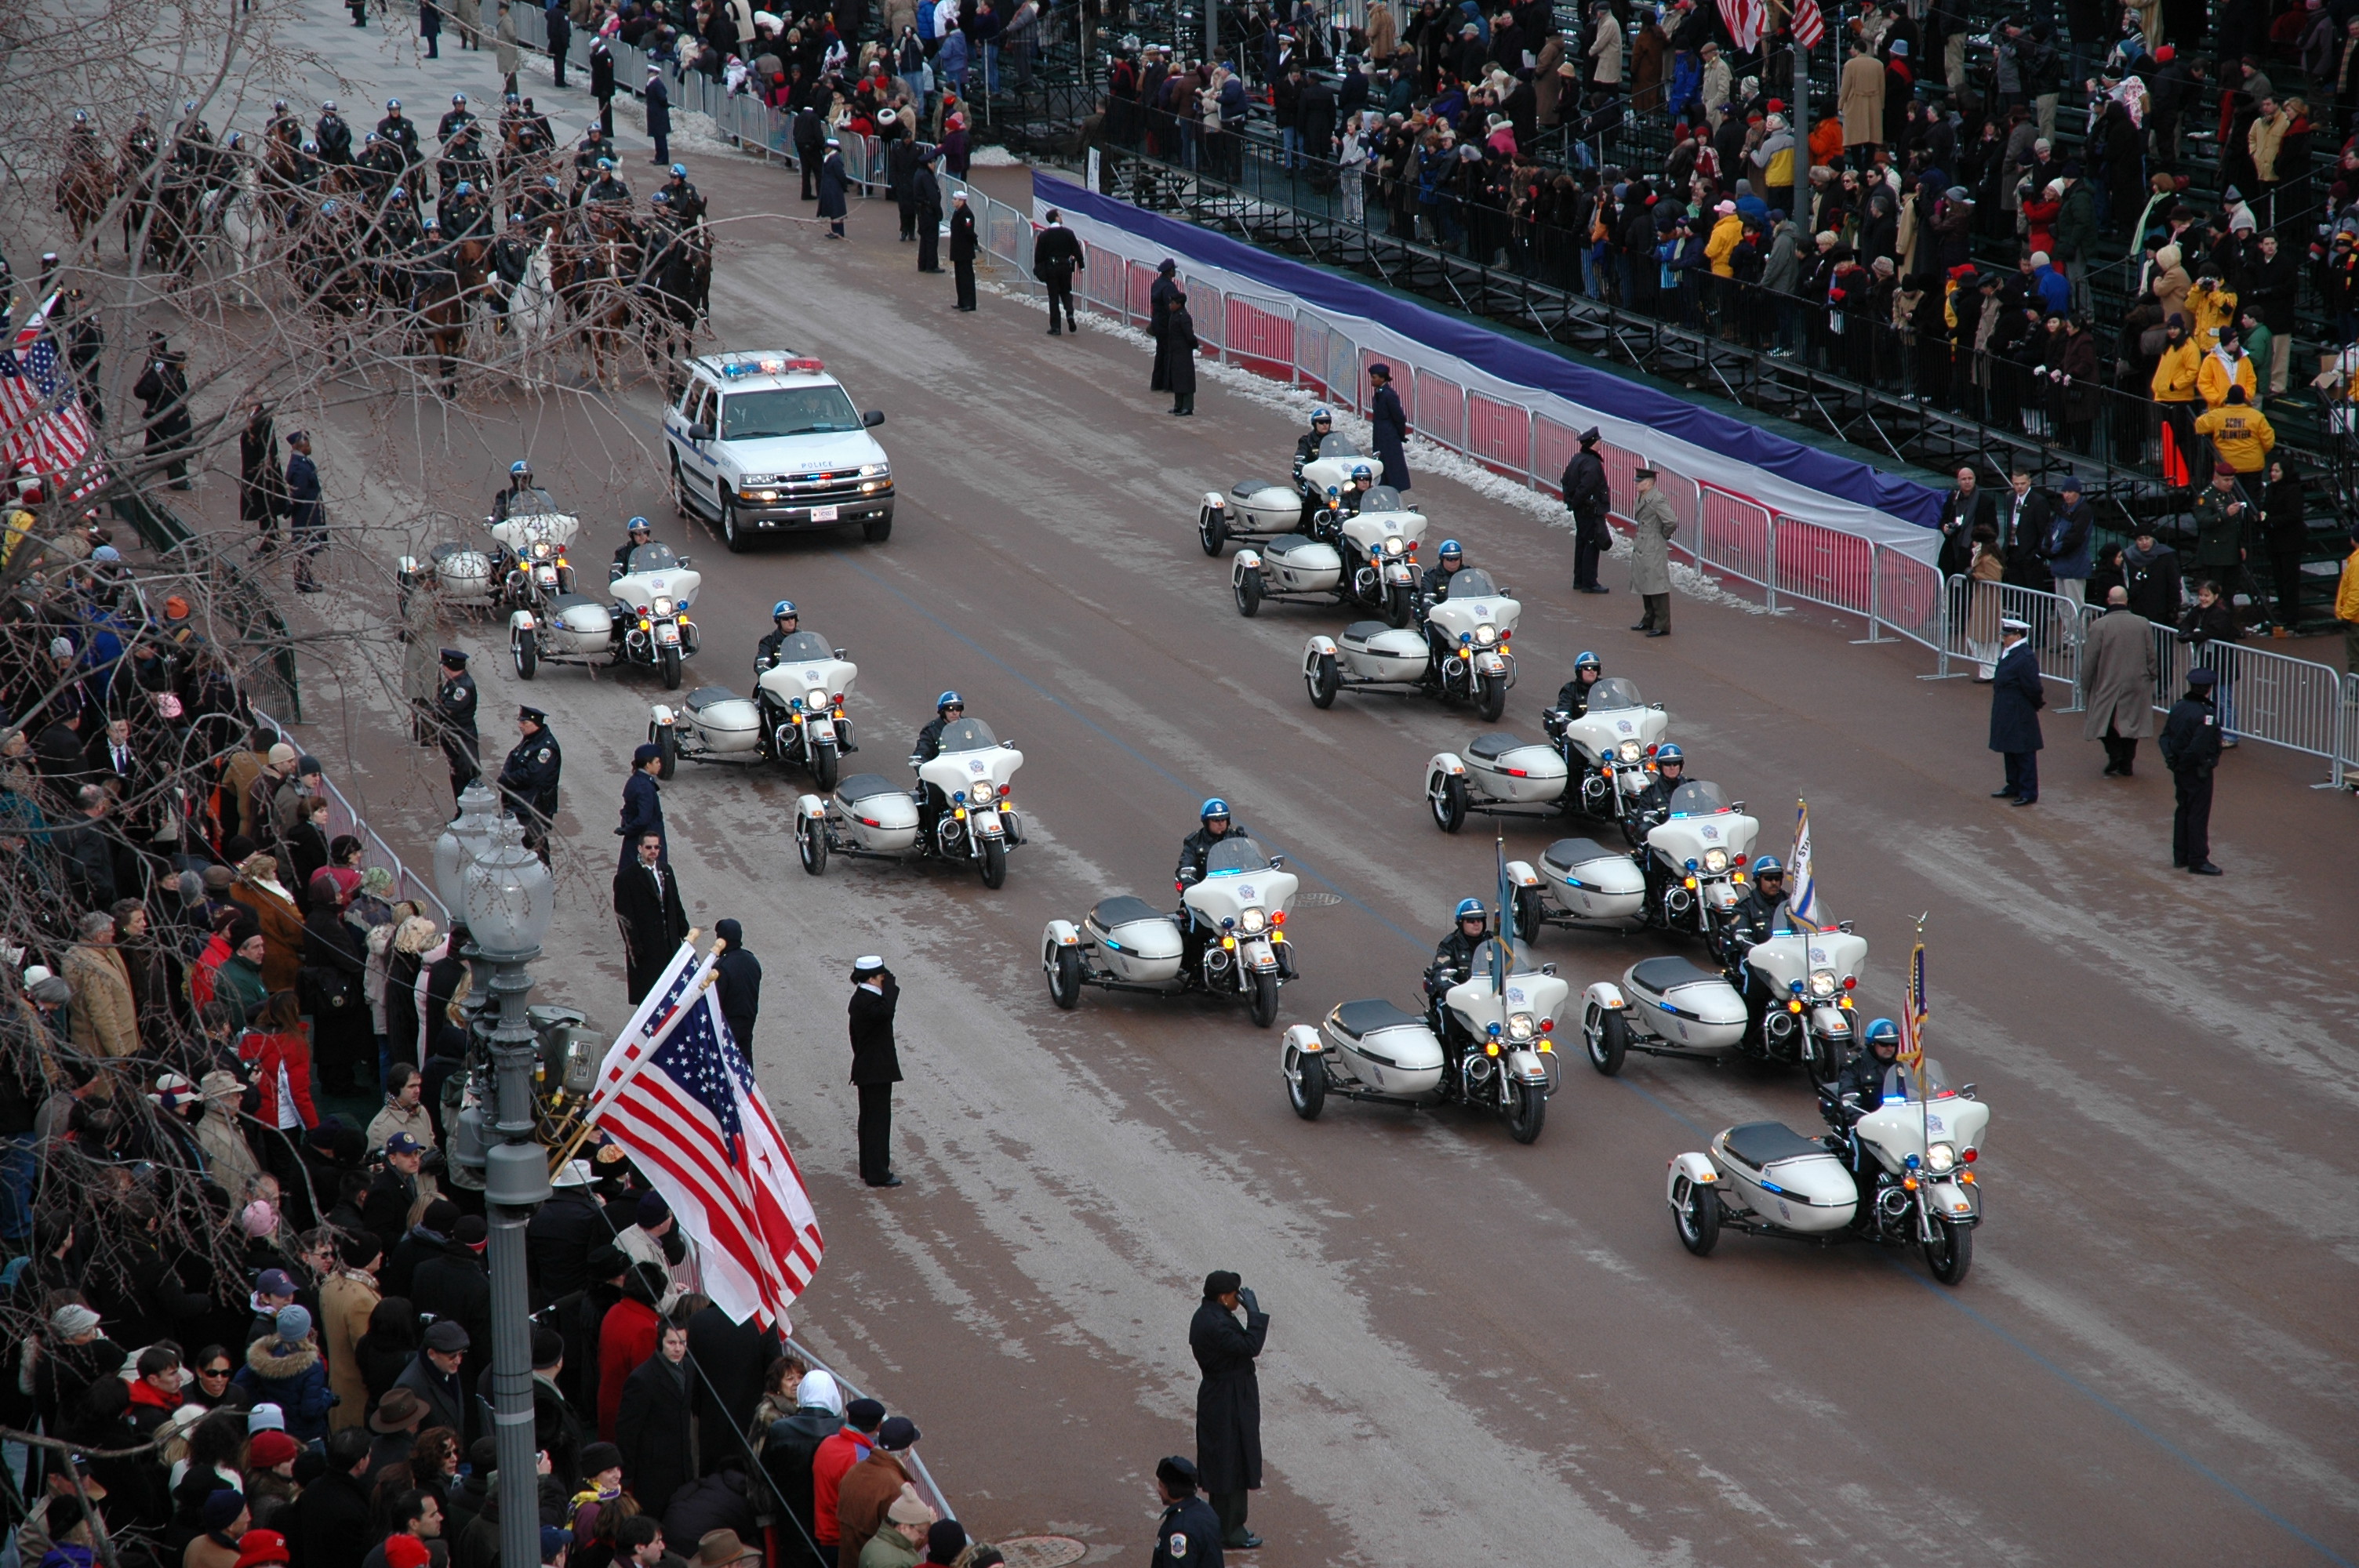 Motorcycles pass by a crowd in a parade.